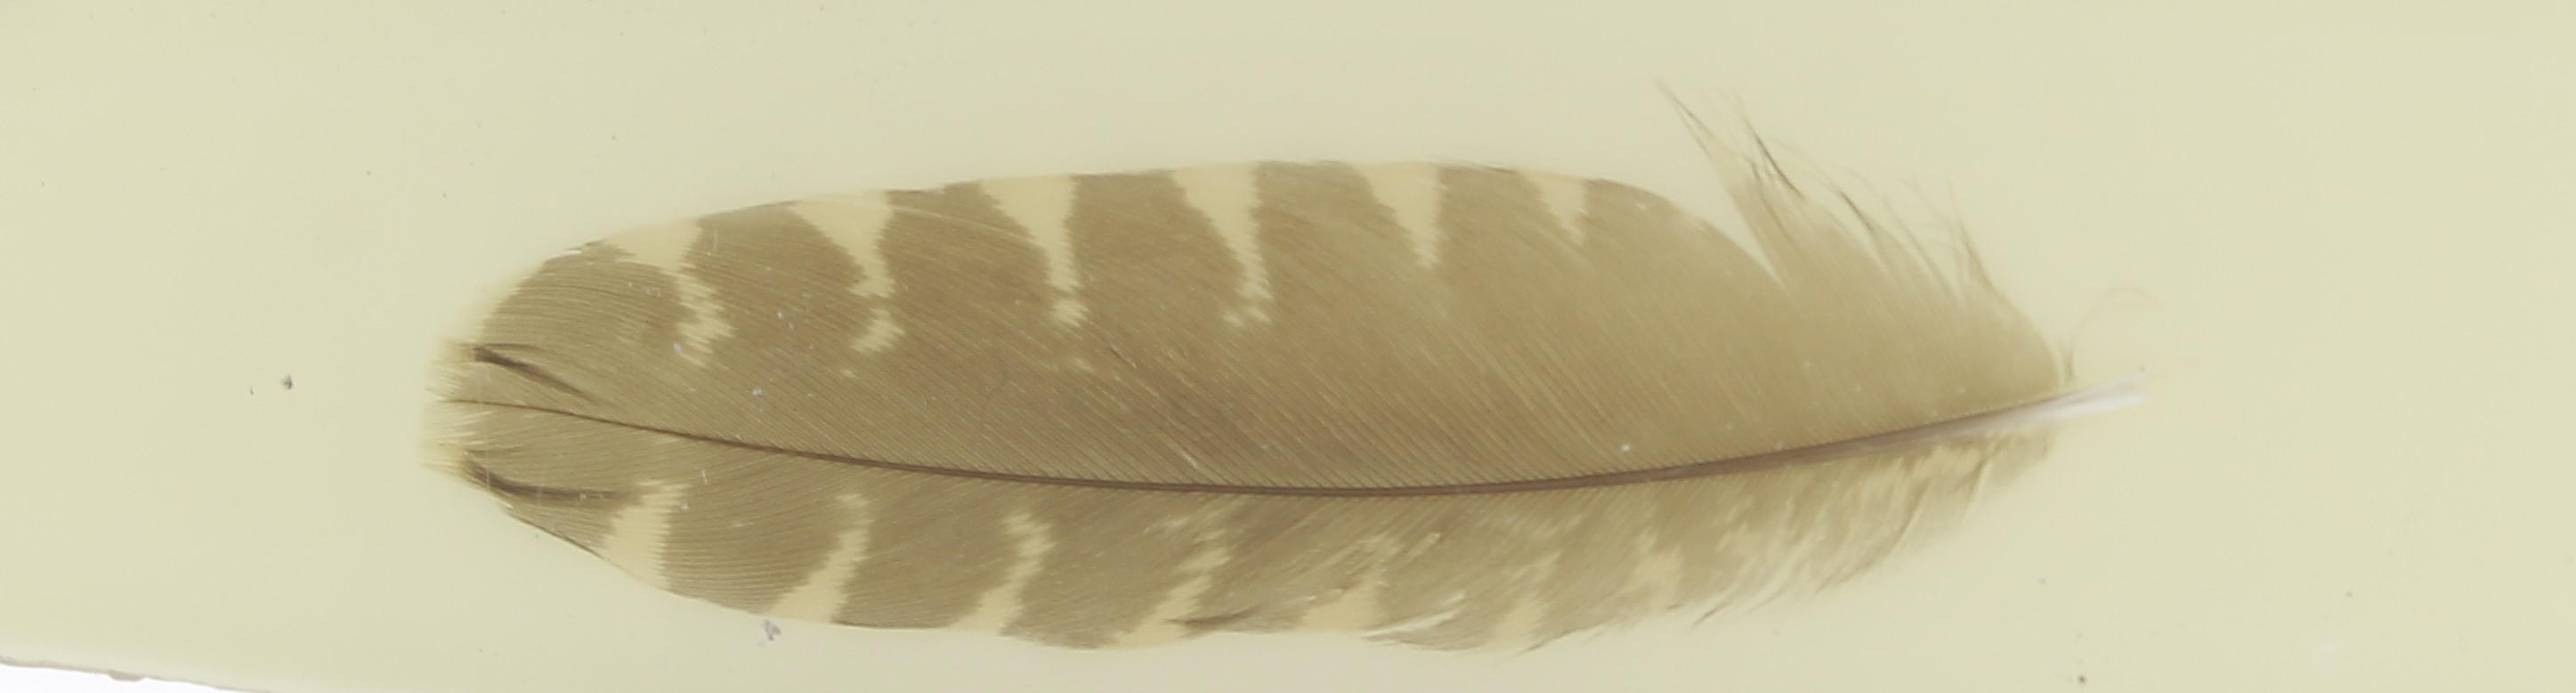 Inclusion, a duplex woodcock feather